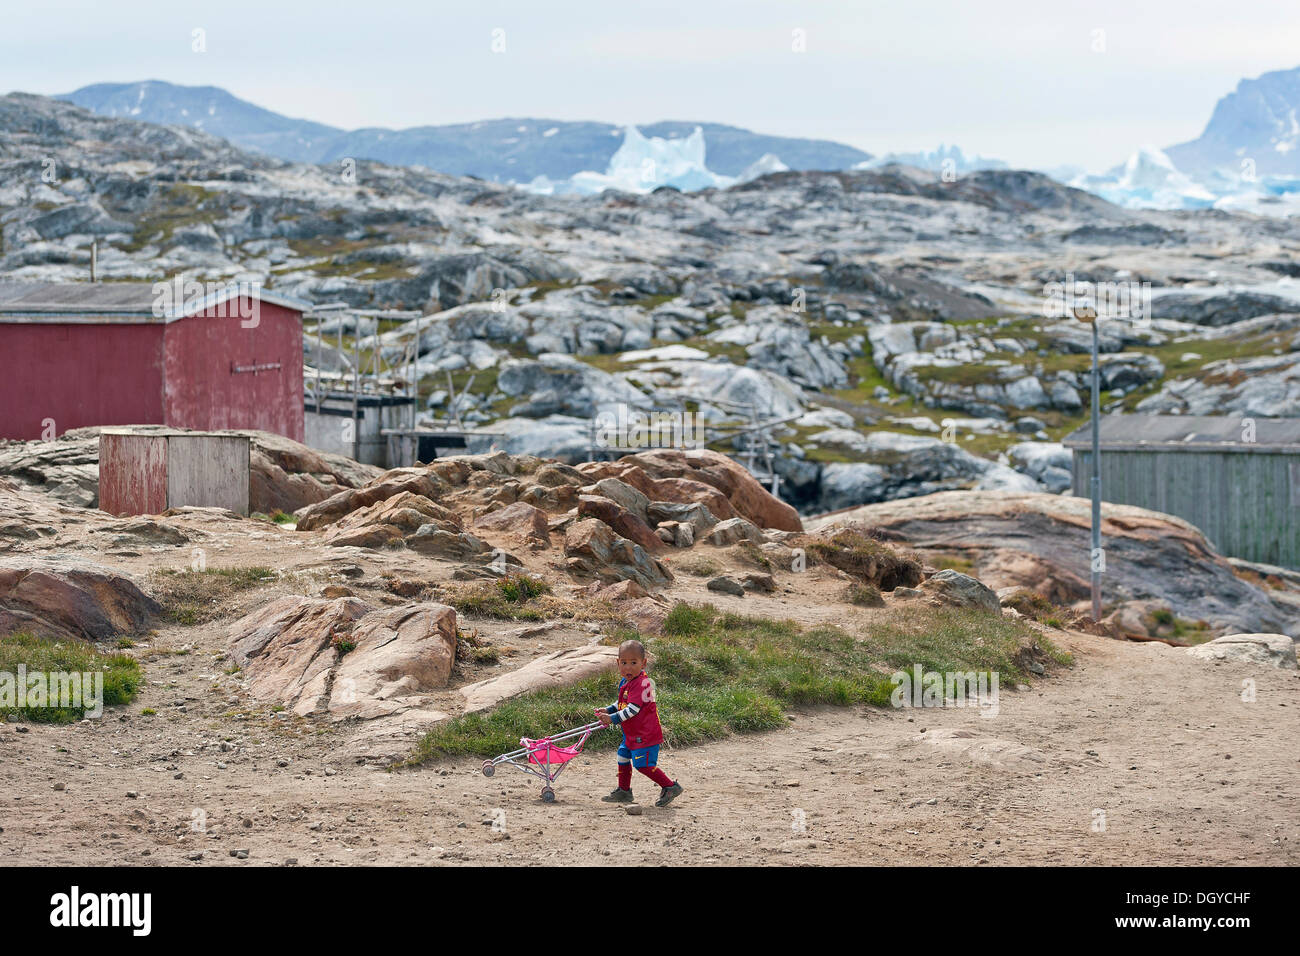 Boy pushes a toy stroller, Inuit settlement of Tiniteqilaaq, Sermilik Fjord, East Greenland, Greenland Stock Photo